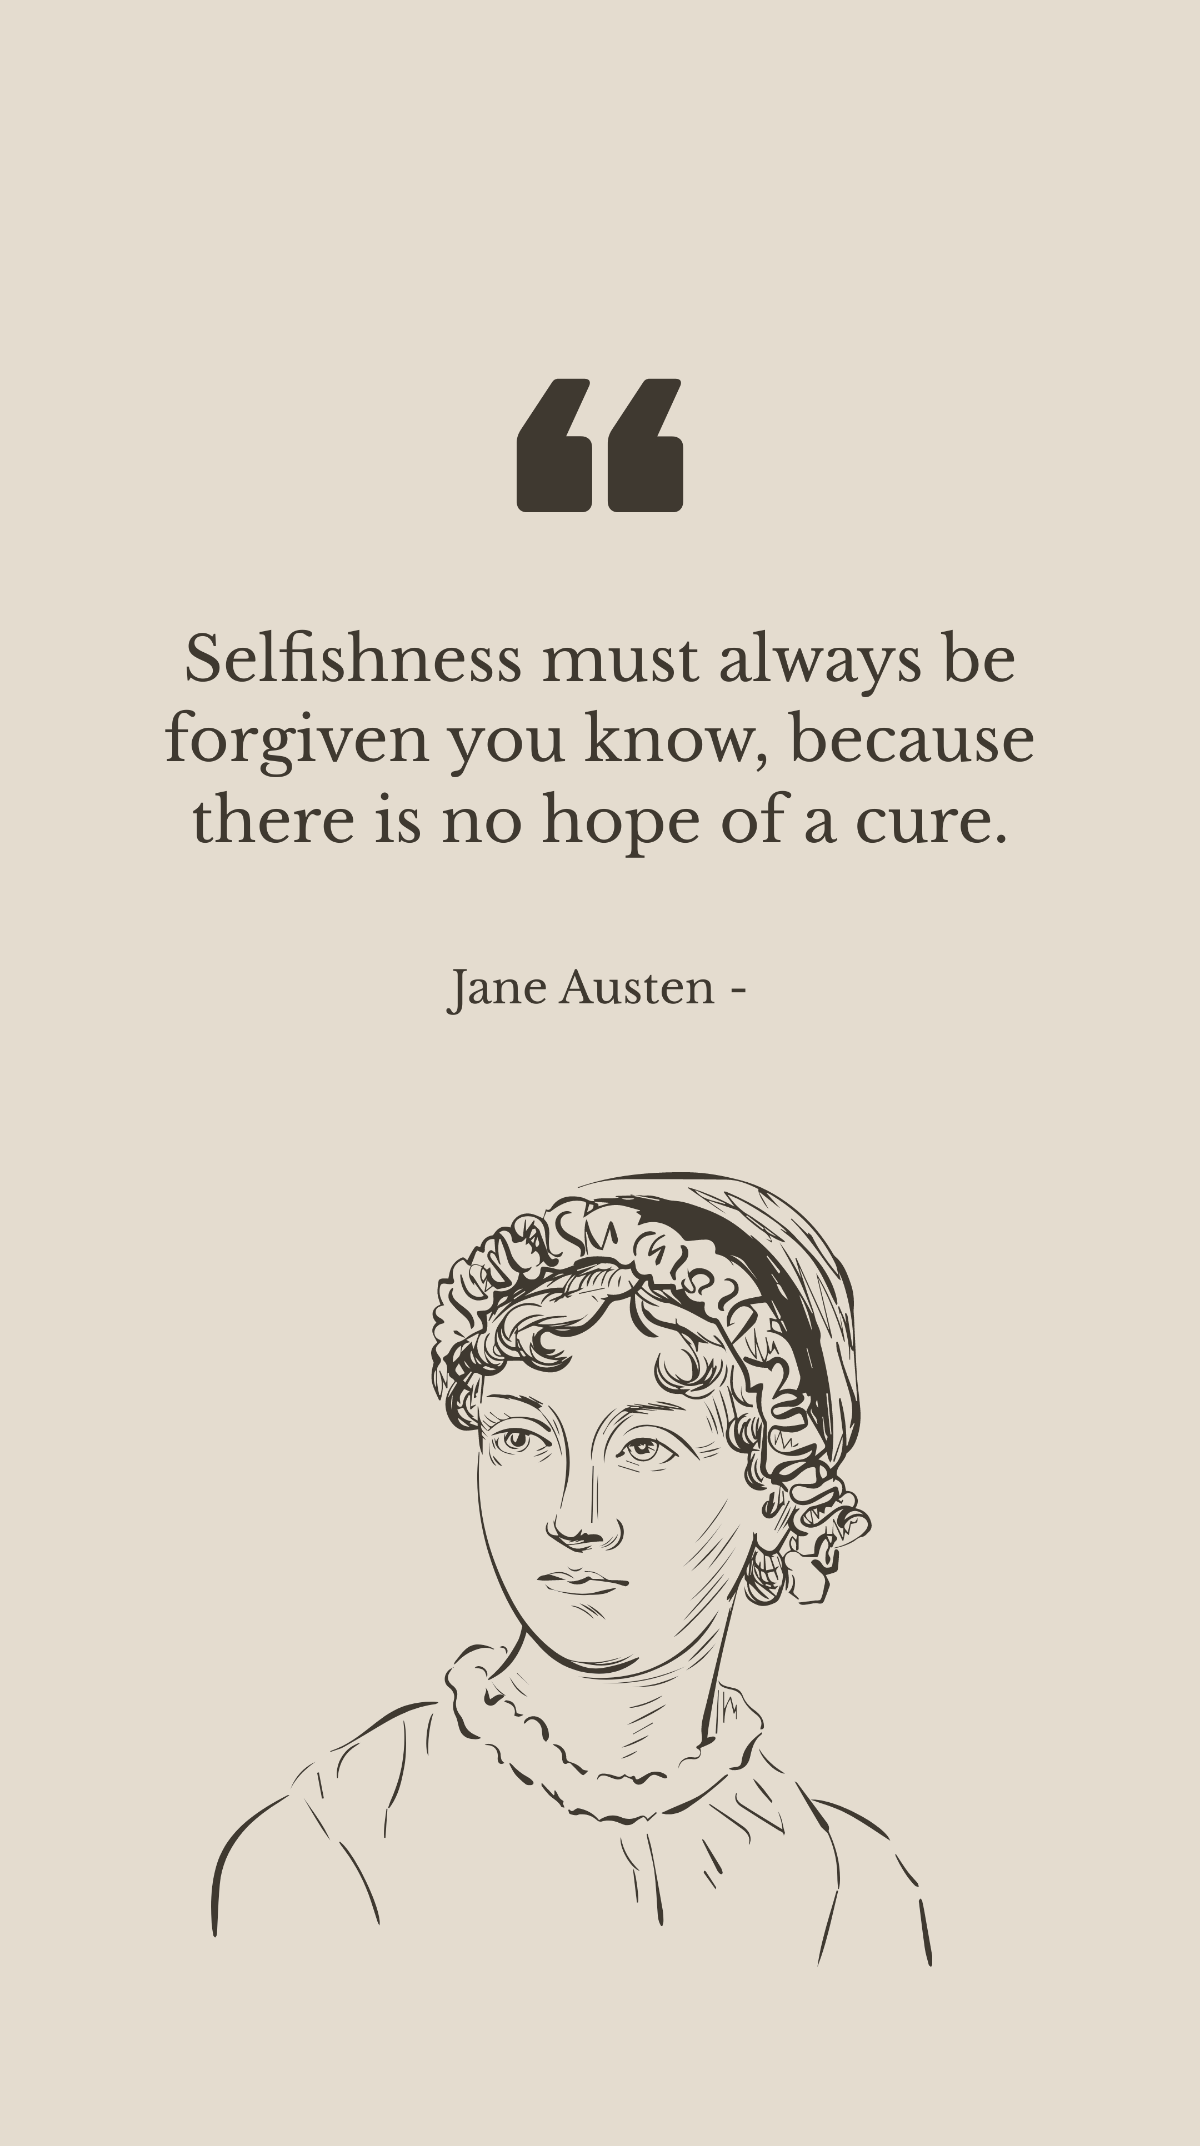 Free Jane Austen - Selfishness must always be forgiven you know, because there is no hope of a cure. Template